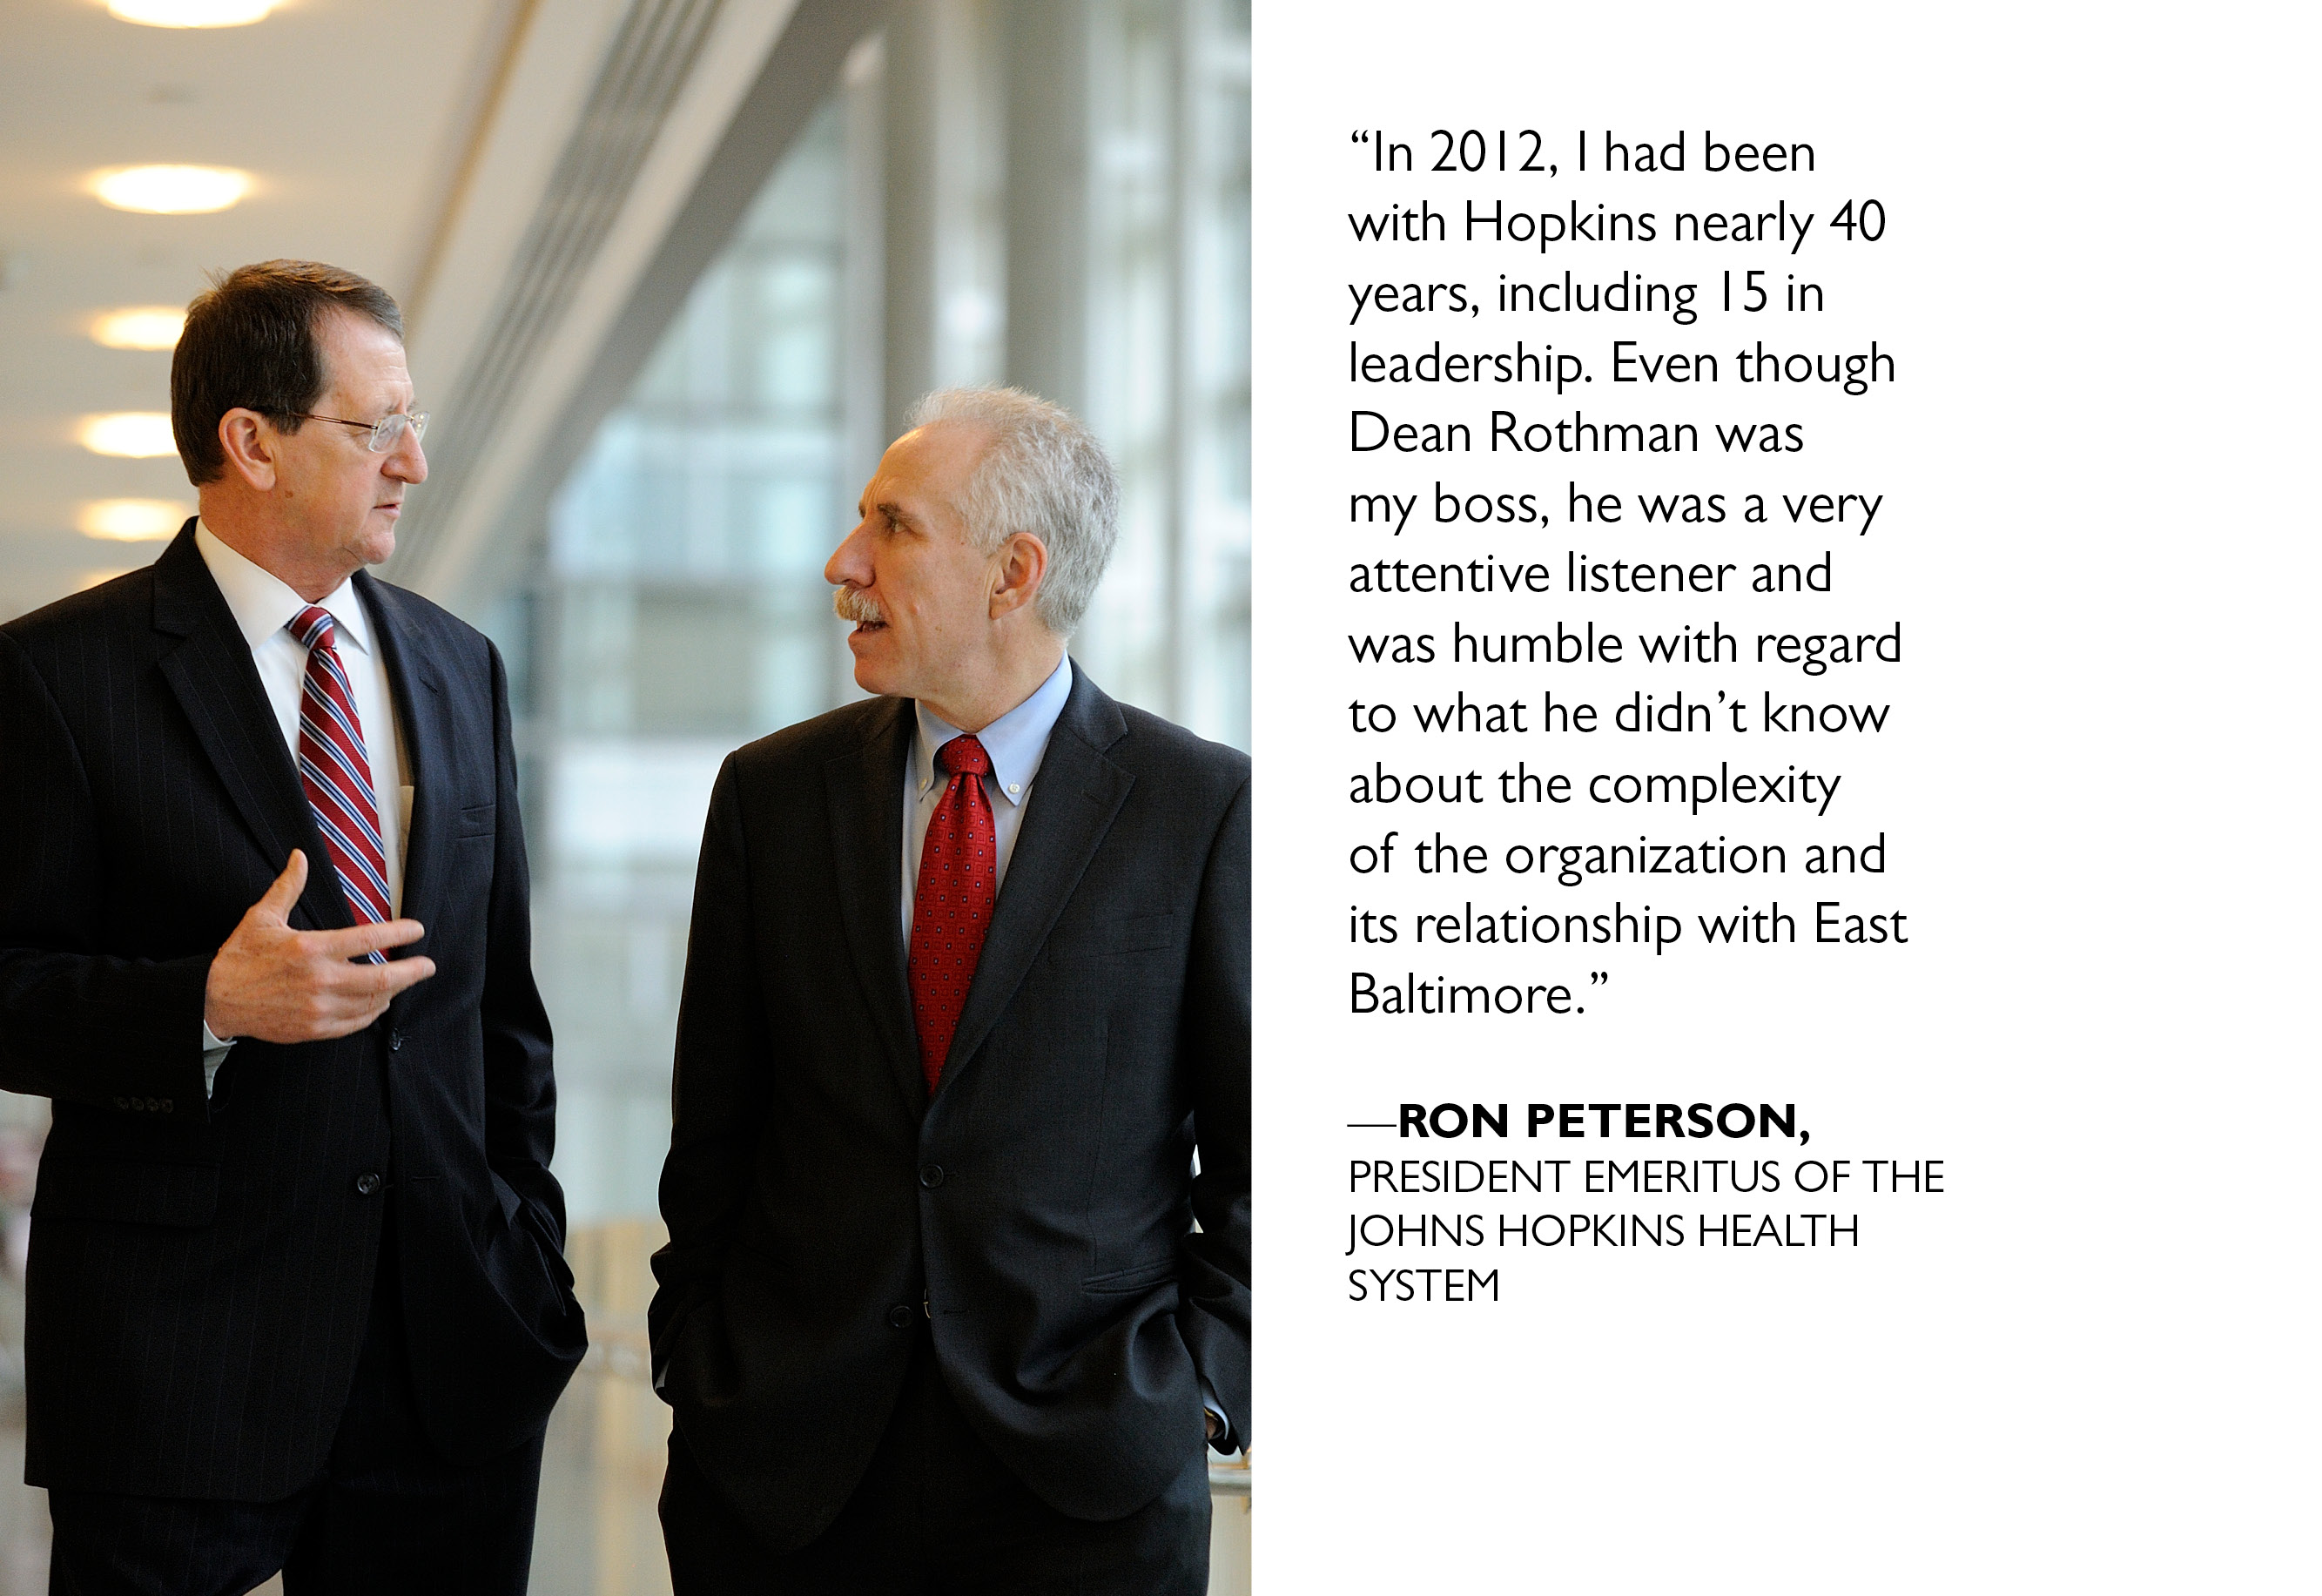 “ In 2012, I had been with Hopkins nearly 40 years, including 15 in leadership. Even though Dean Rothman was my boss, he was a very attentive listener and was humble with regard to what he didn’t know about the complexity of the organization and its relationship with East Baltimore.” —RON PETERSON